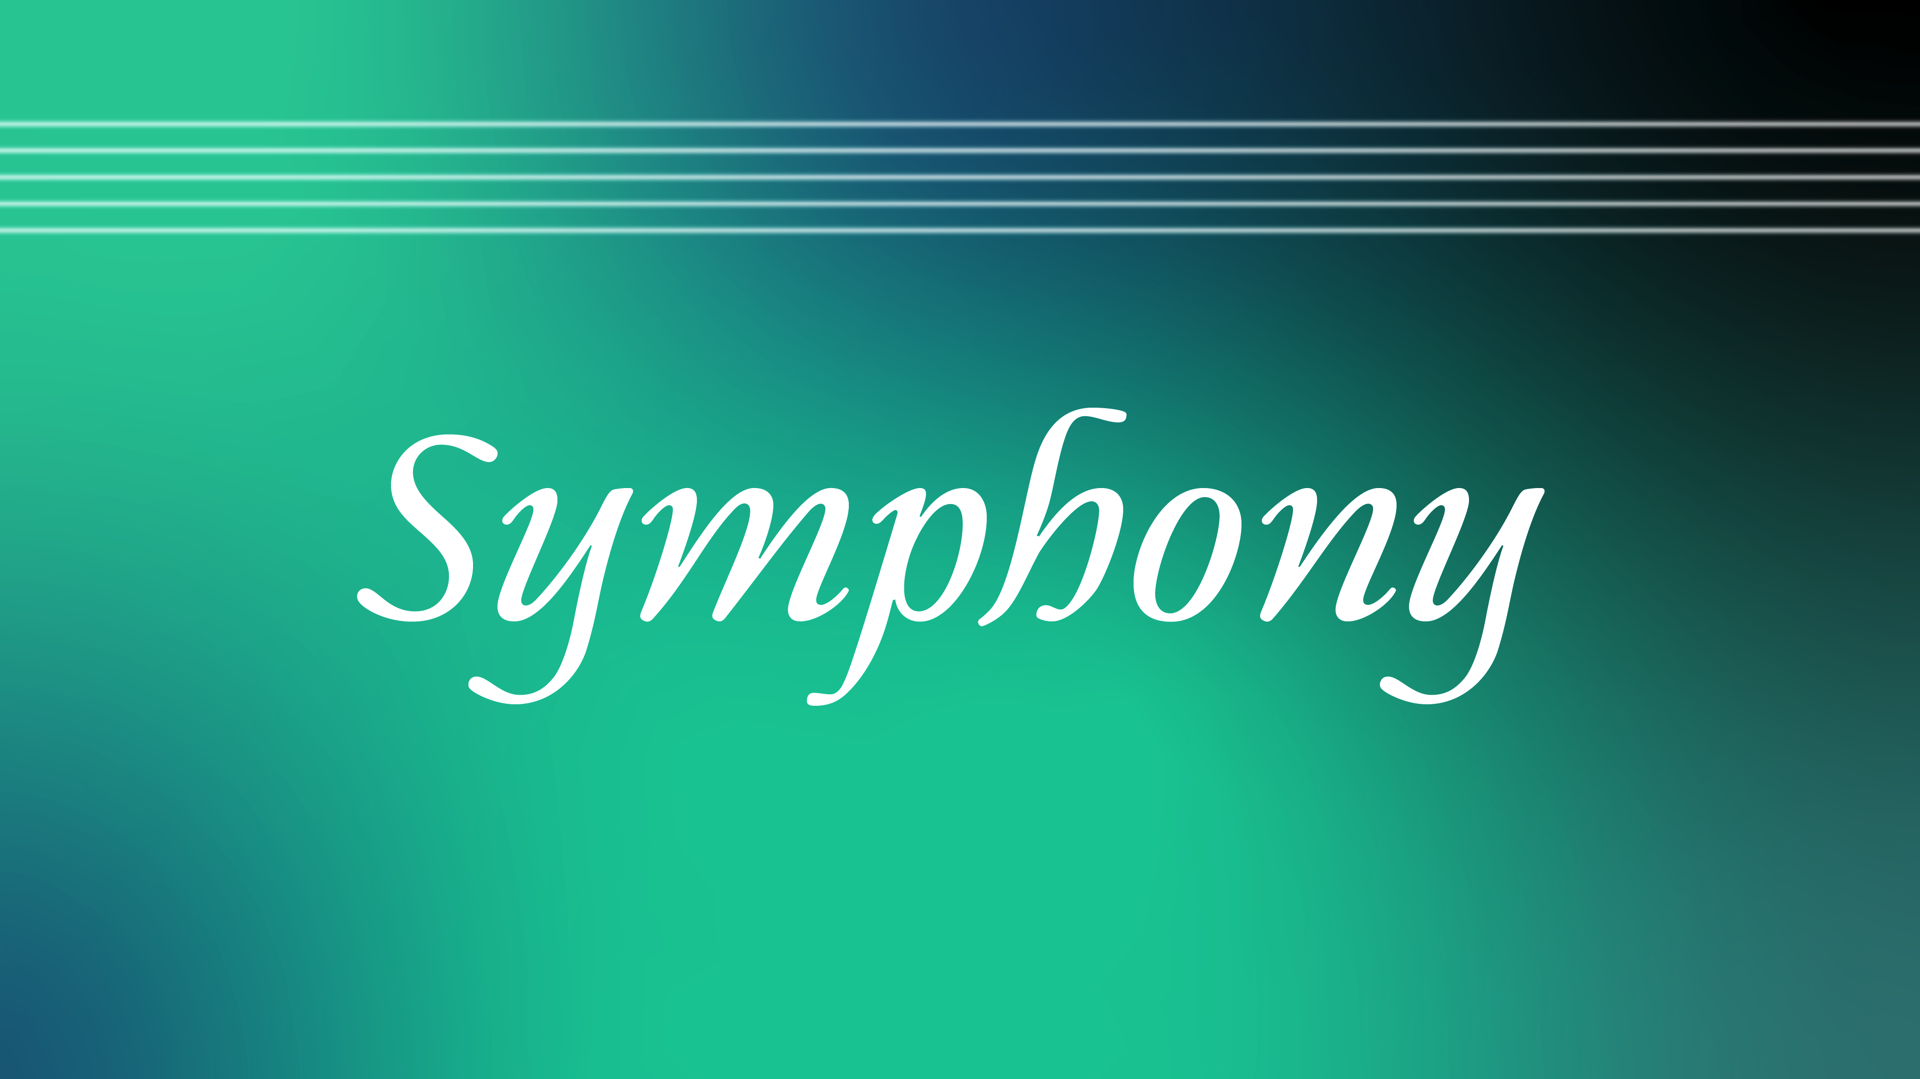 Blue and water green gradient background. On the top layer, "Symphony" is written, the name of the type family.